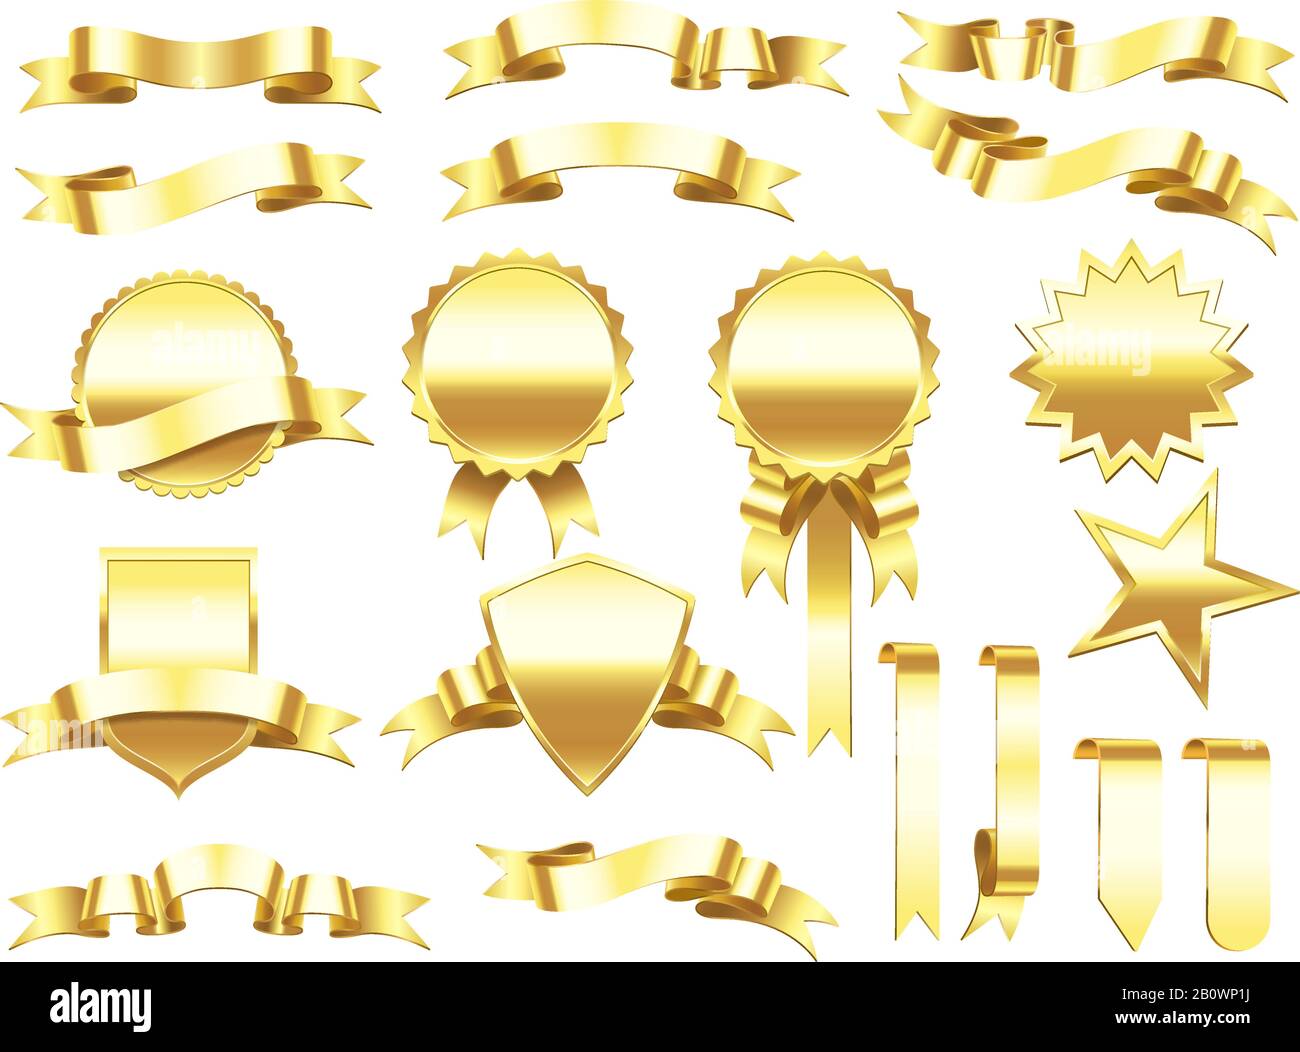 Gold banner ribbon. Elegant golden ribbons labels and products banners. Premium label sign vector set Stock Vector